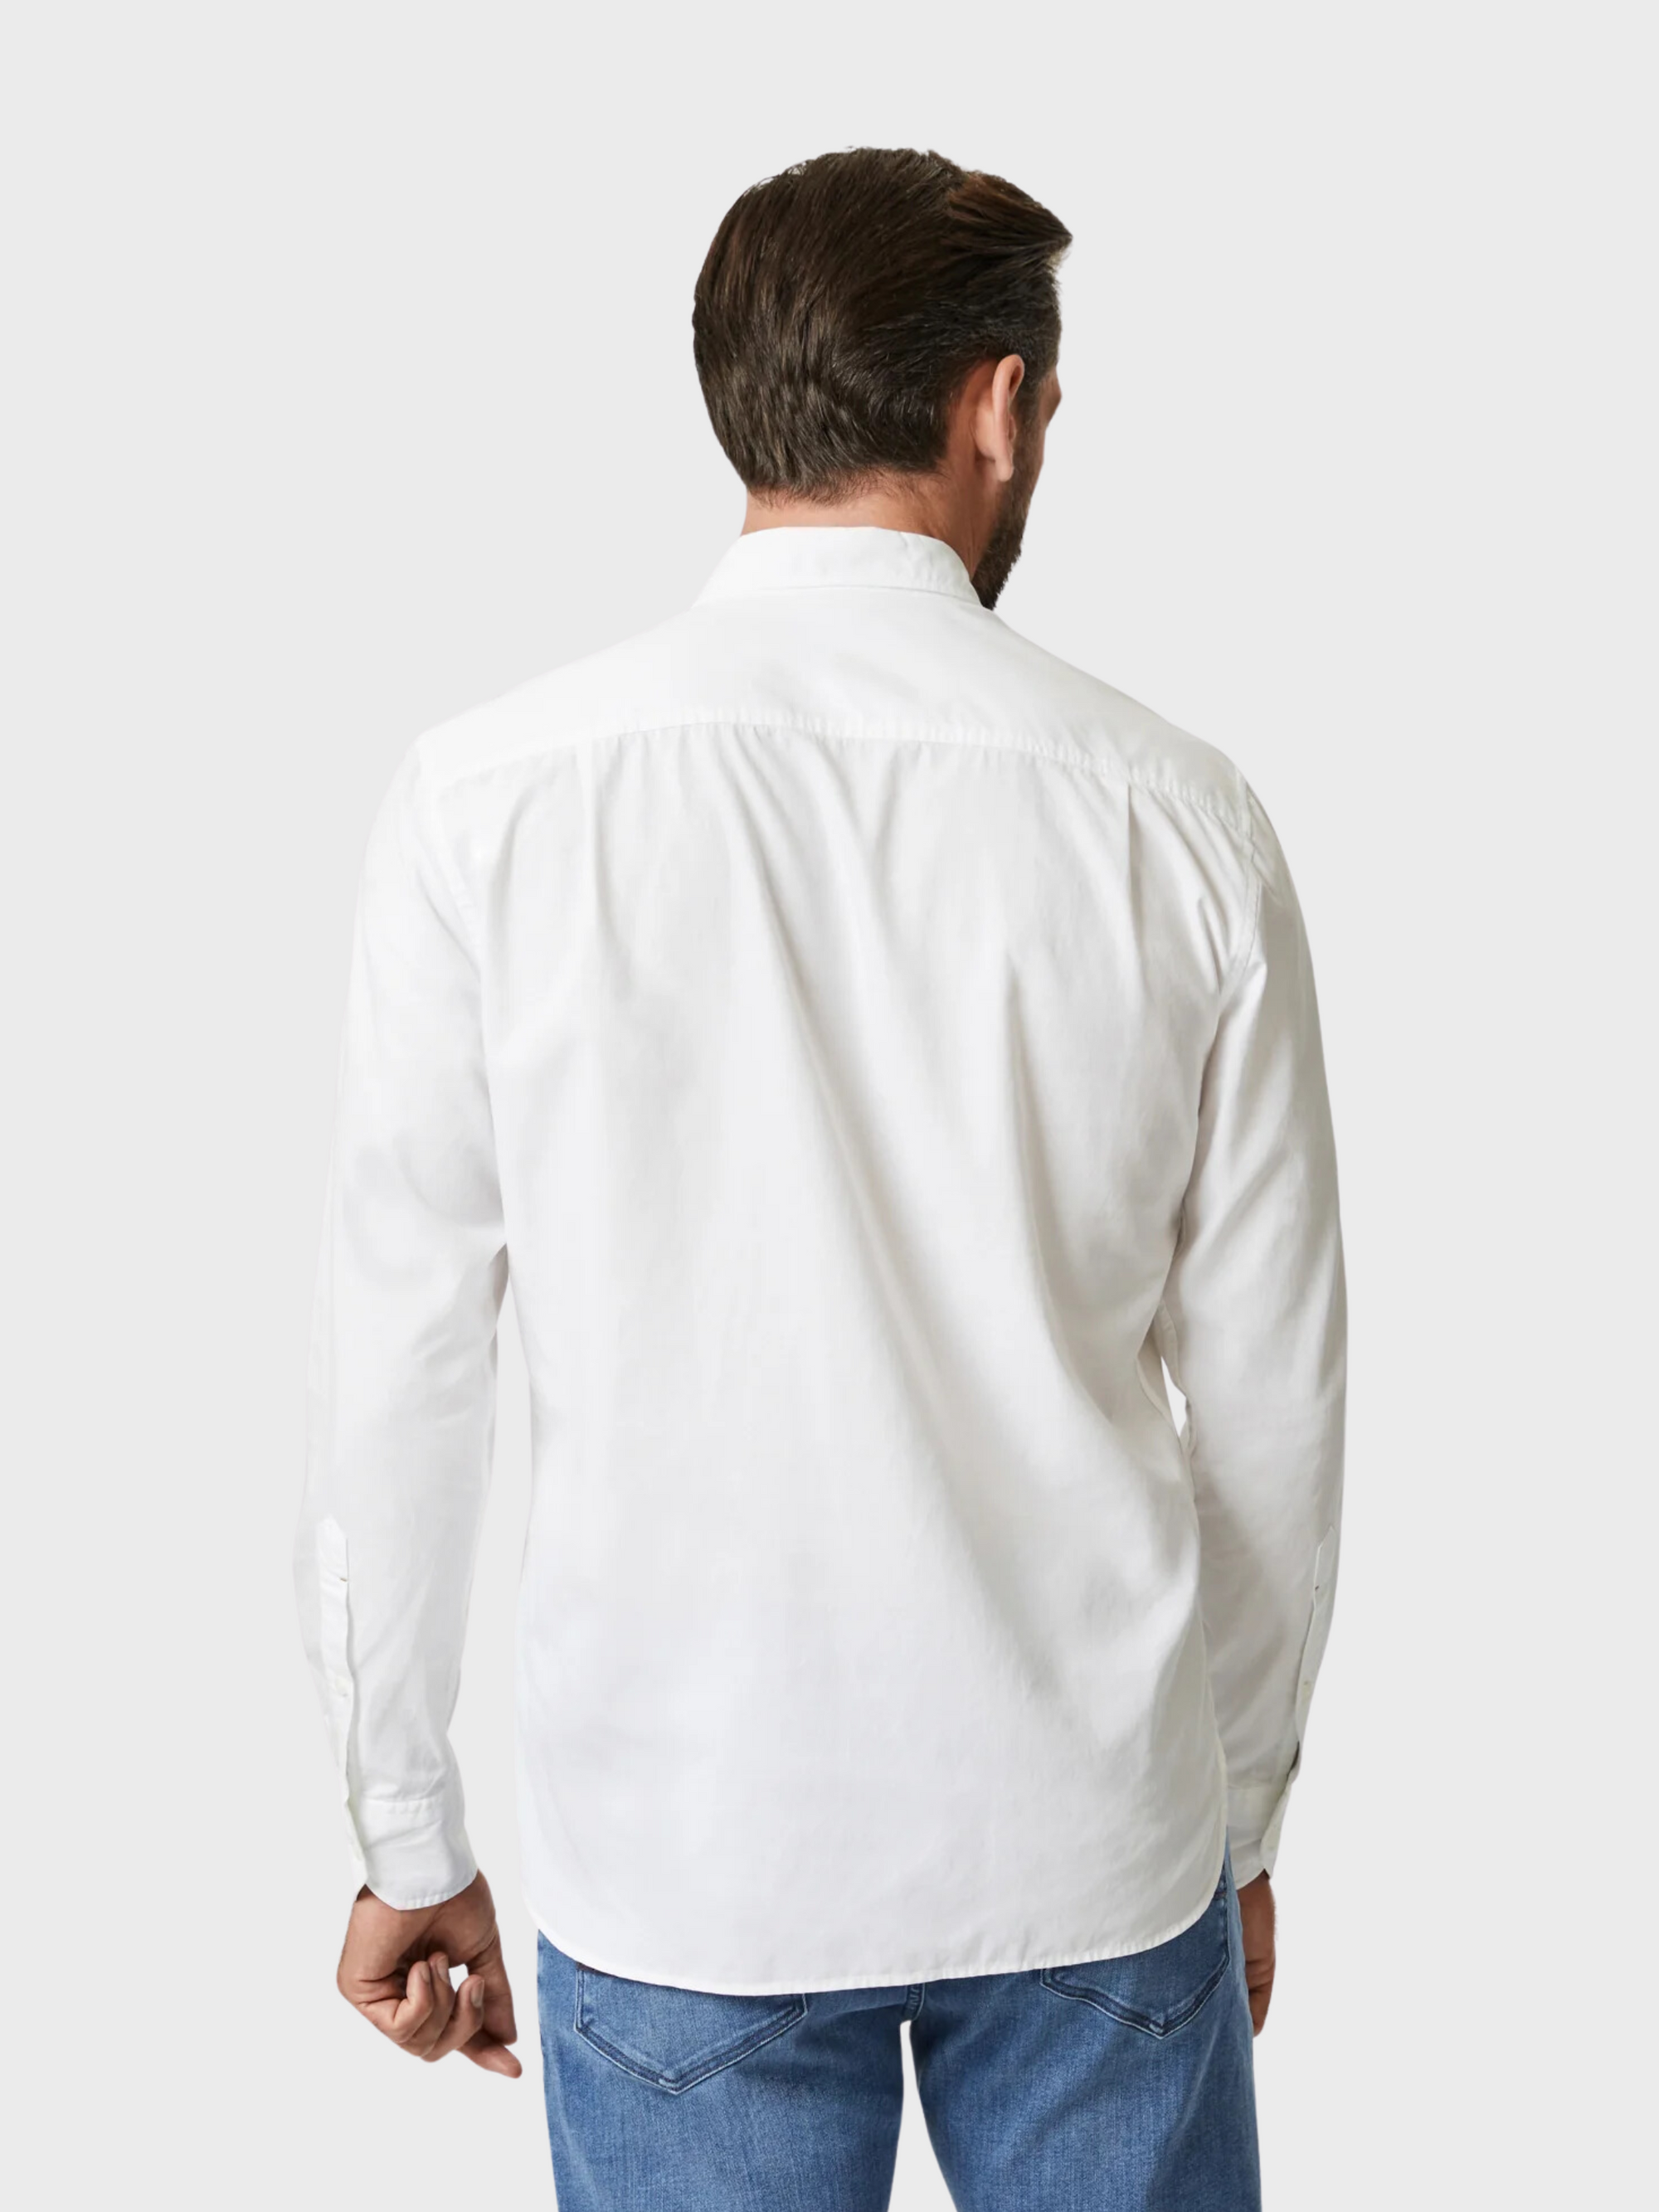 34 Heritage Luxe Twill Shirt Bright White-Men's Shirts-Howard-Surrey-Canada